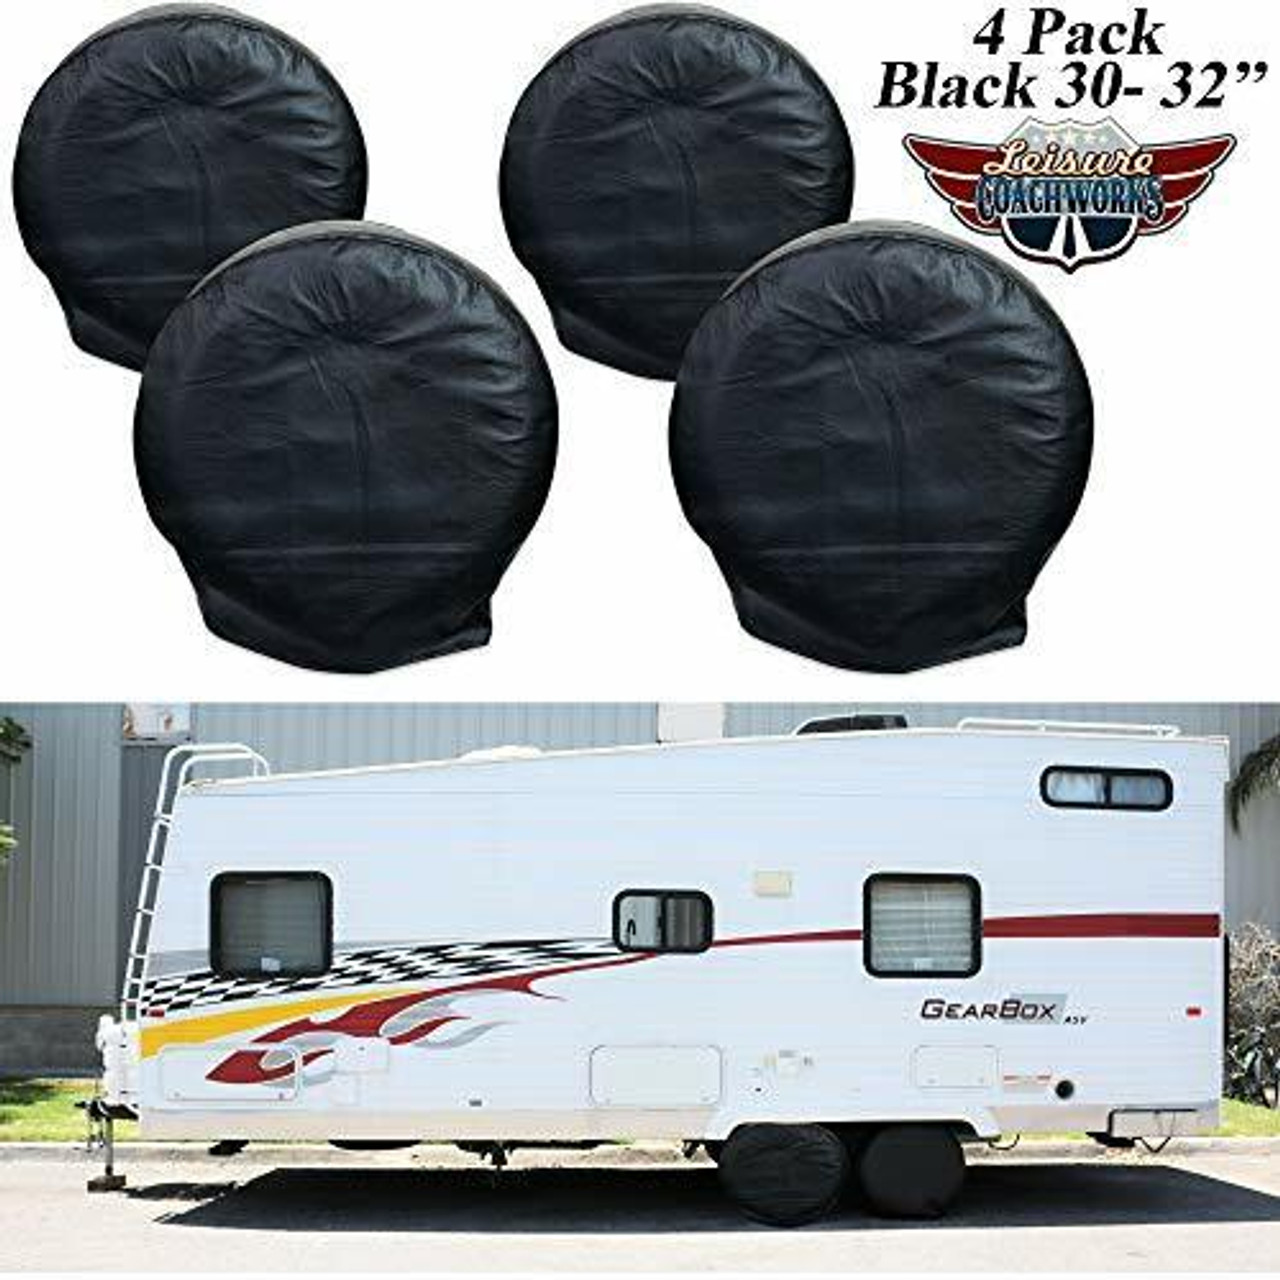 Leisure Coachworks Tire Covers for RV Wheel Set of 4 Motorhome Wheel Covers Waterproof Oxford Cotton Tire Protectors Tire Covers Fits 30 - 32 Tire Diameters